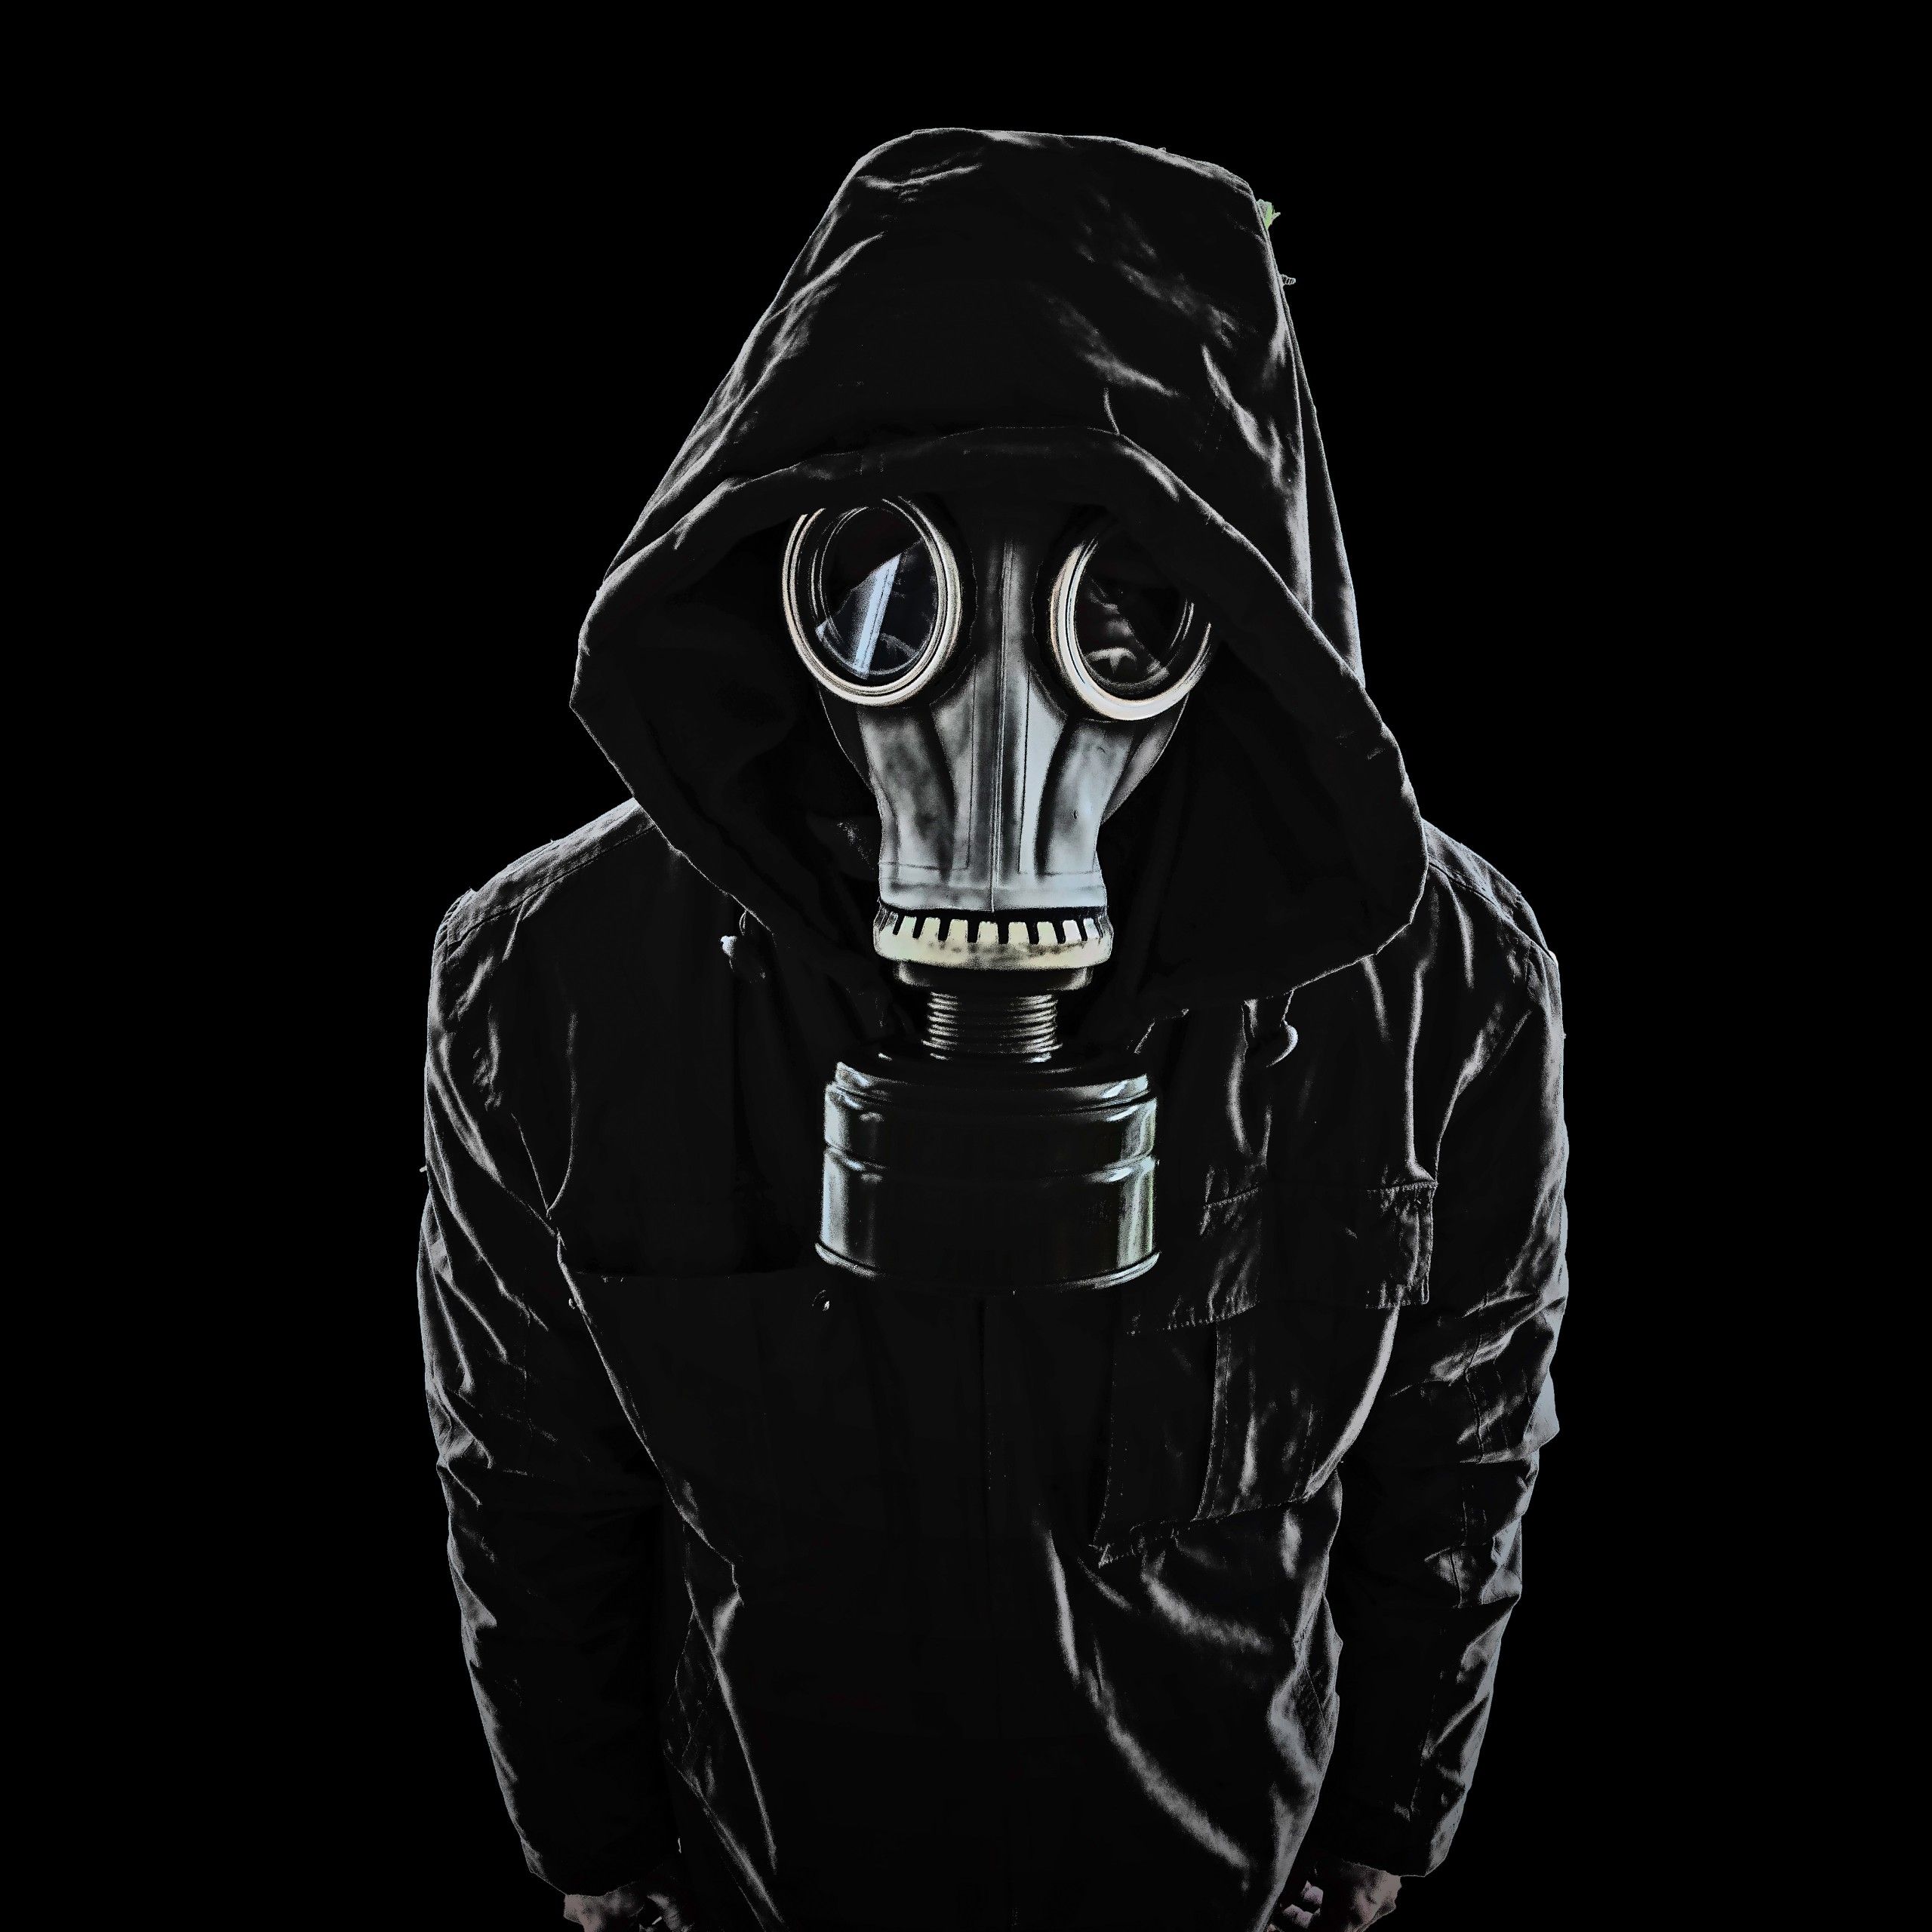 Wallpaper Gas mask, Black, Dark background, 4K, 8K, Photography,. Wallpaper for iPhone, Android, Mobile and Desktop